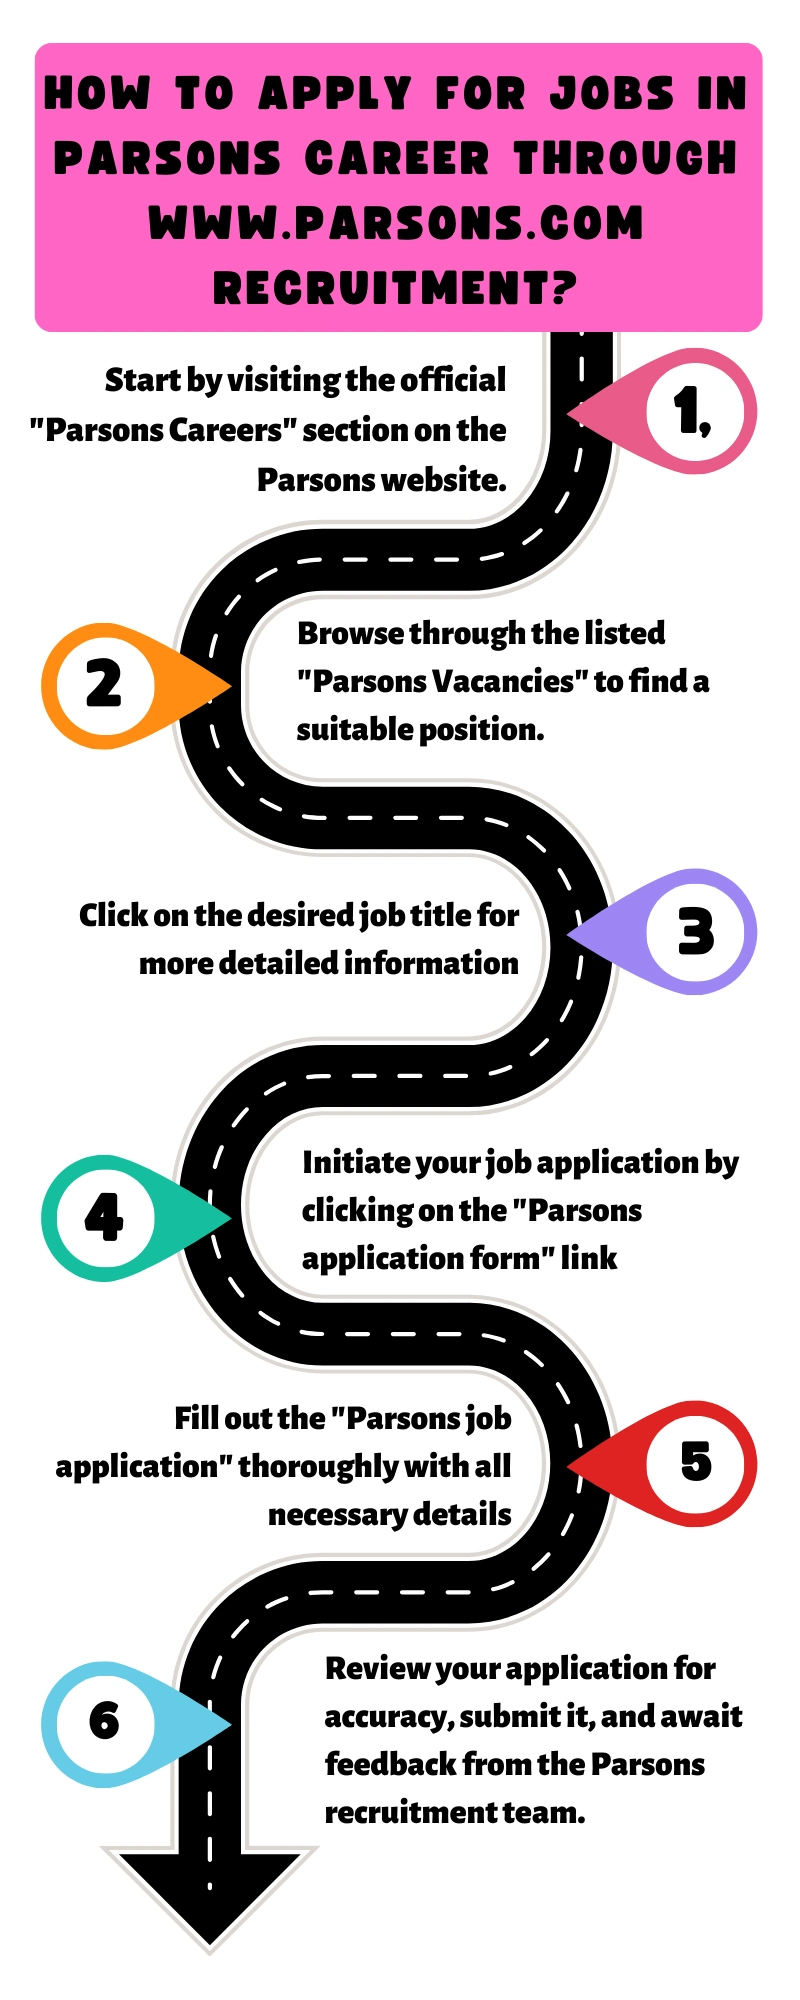 How to Apply for Jobs in Parsons Career through www.parsons.com recruitment?